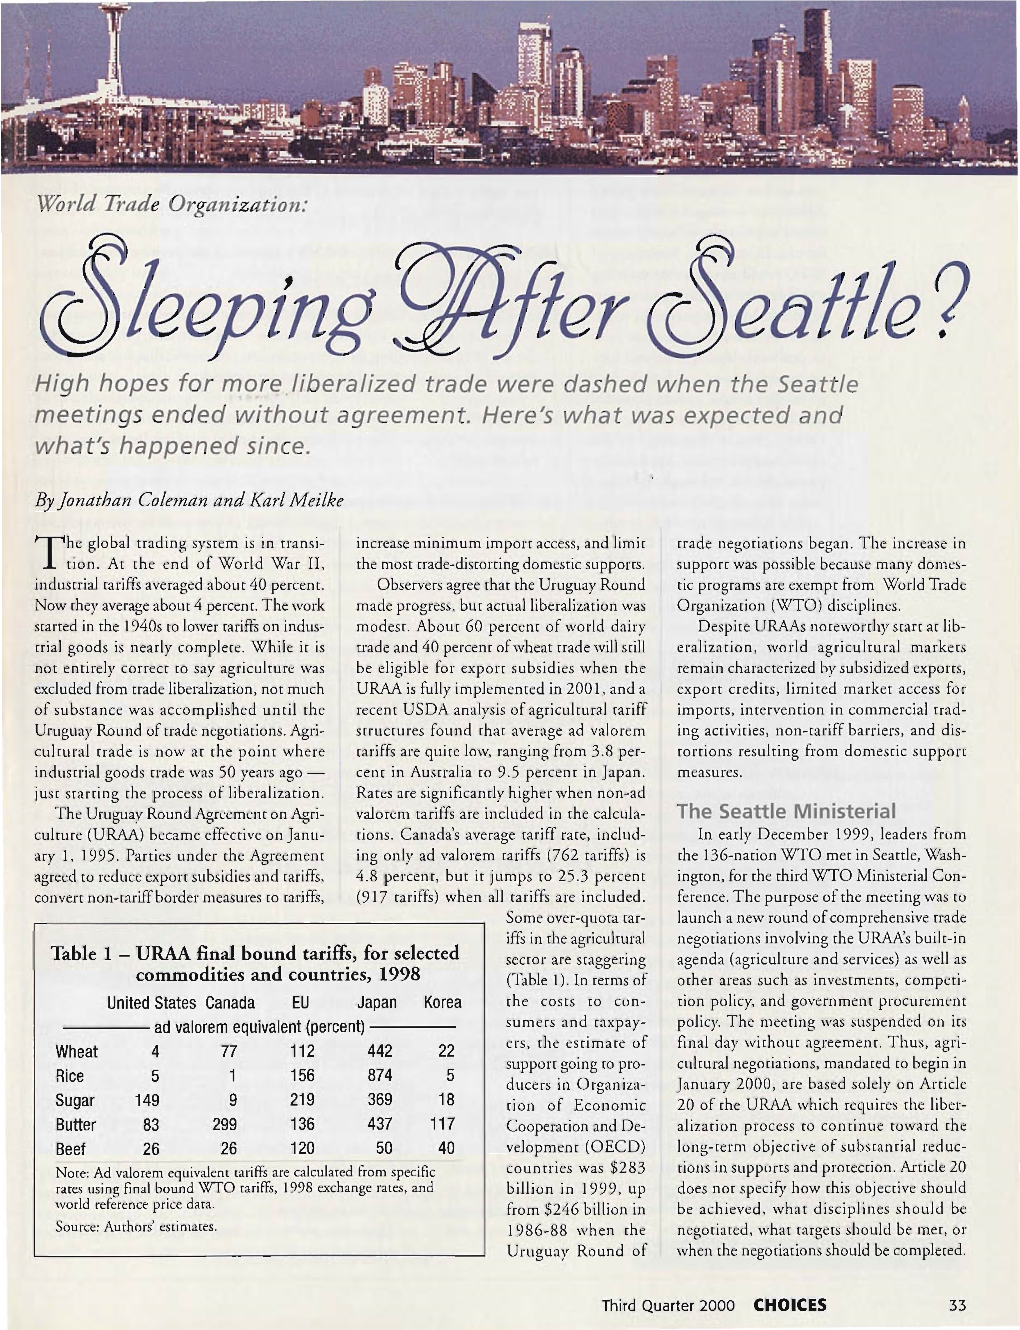 Leeping Eattle? High Hopes for M,Ore .Liberalized Trade Were Dashed When the Seattle Meetings Ended Without Agreement